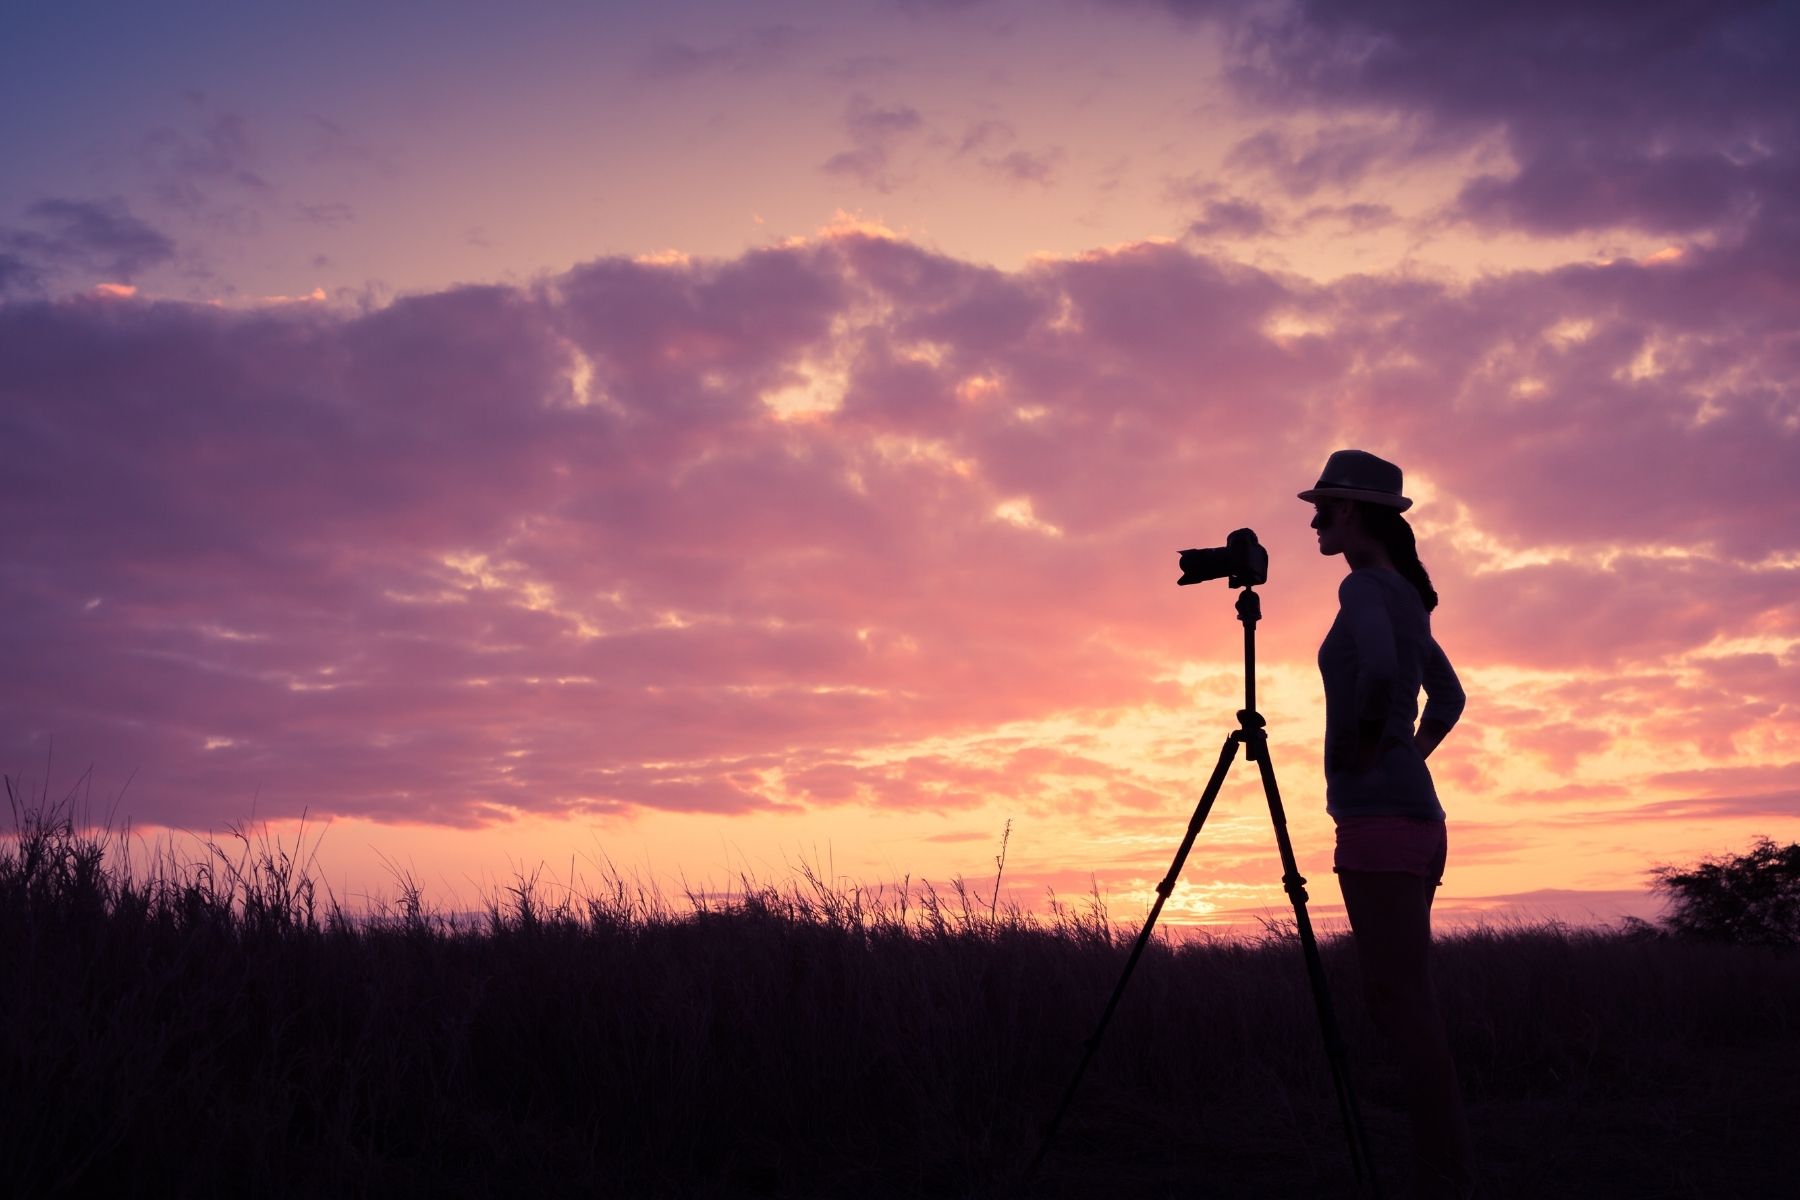 Image of a photographer taking a photo at dusk